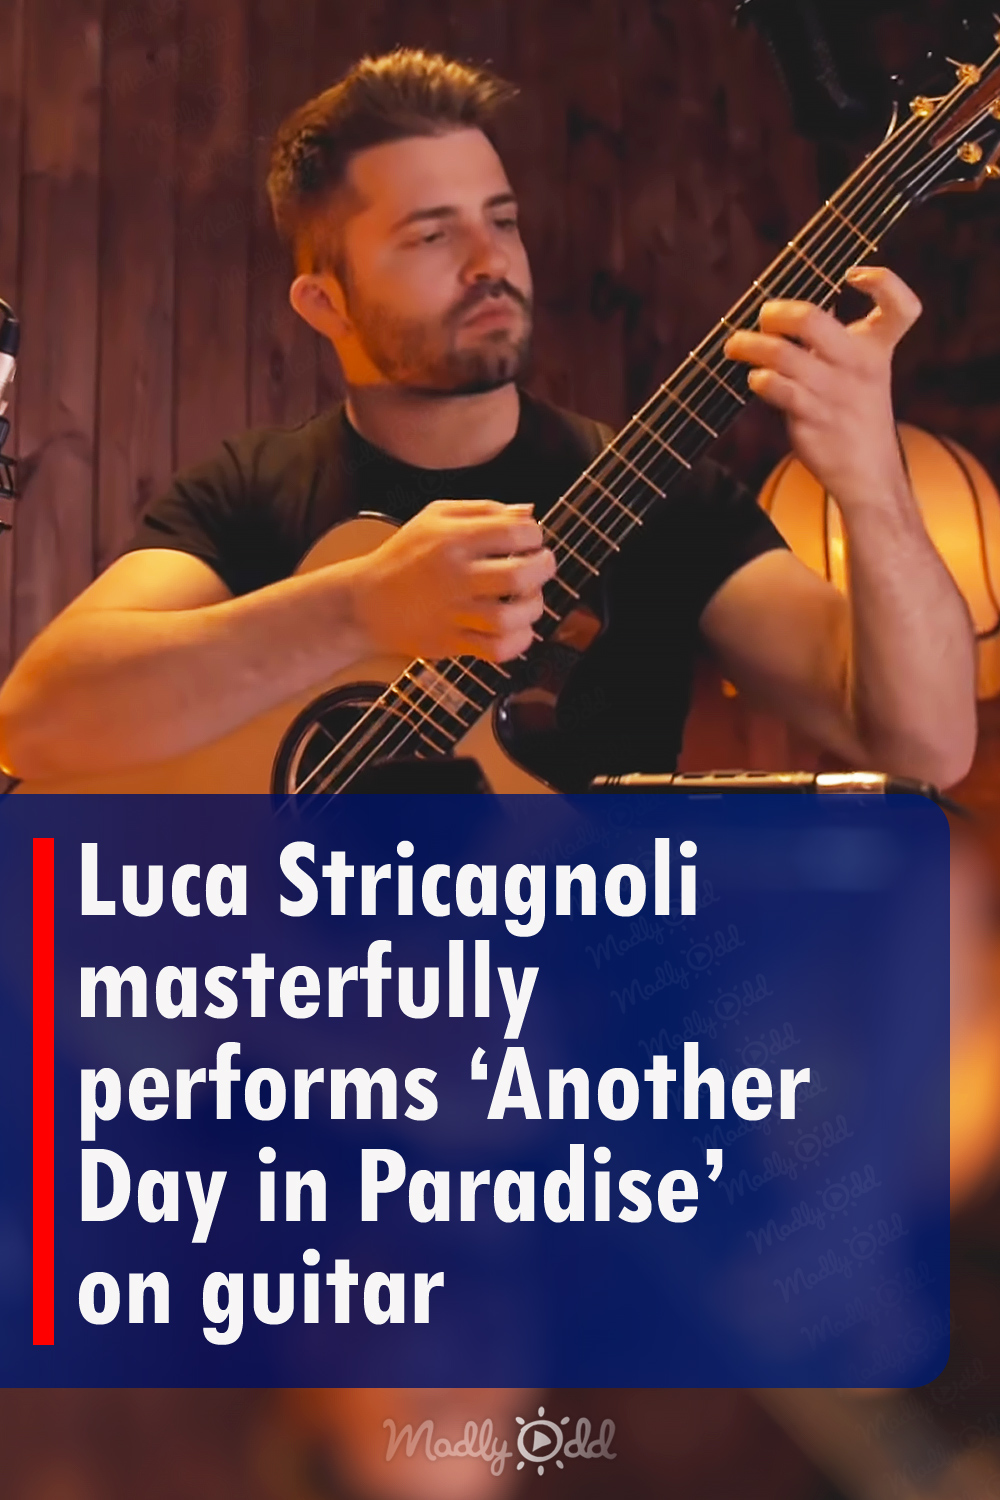 Luca Stricagnoli masterfully performs ‘Another Day in Paradise’ on guitar